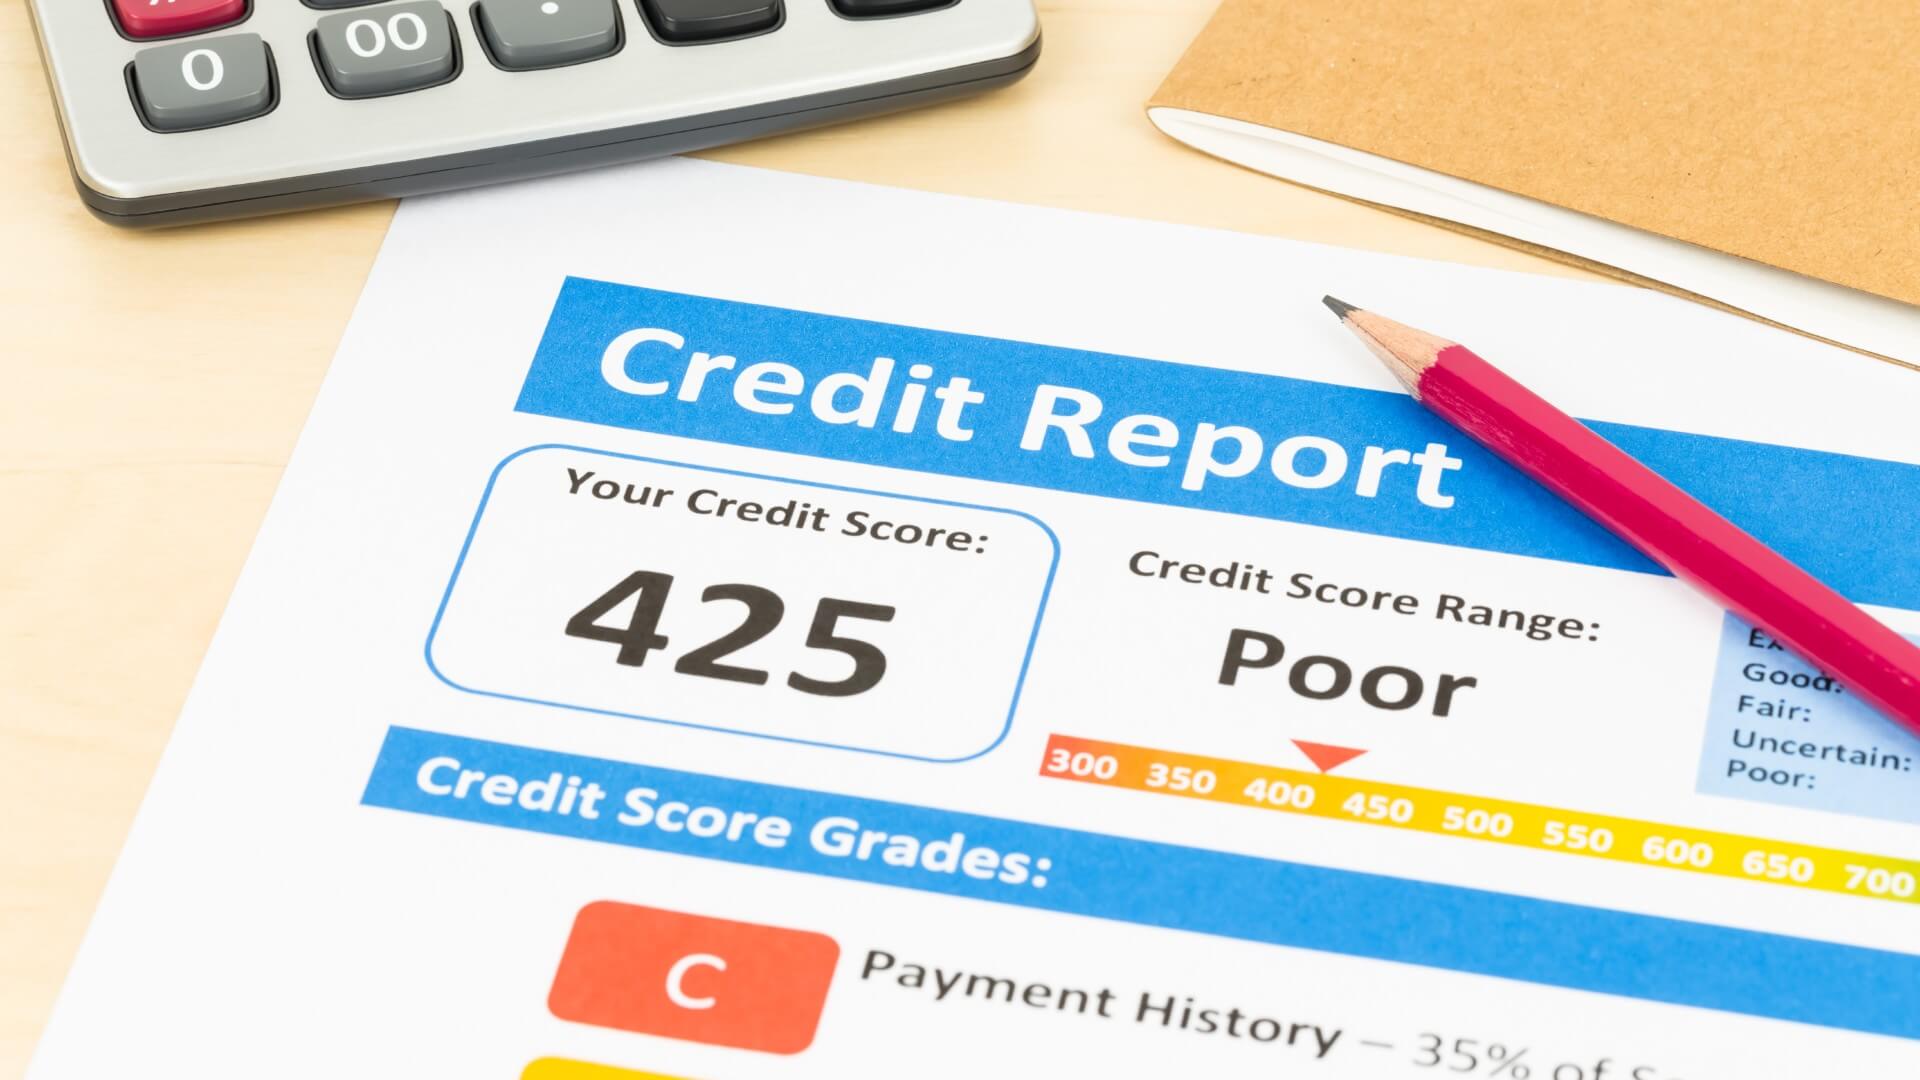 a credit report with a poor credit score of 425